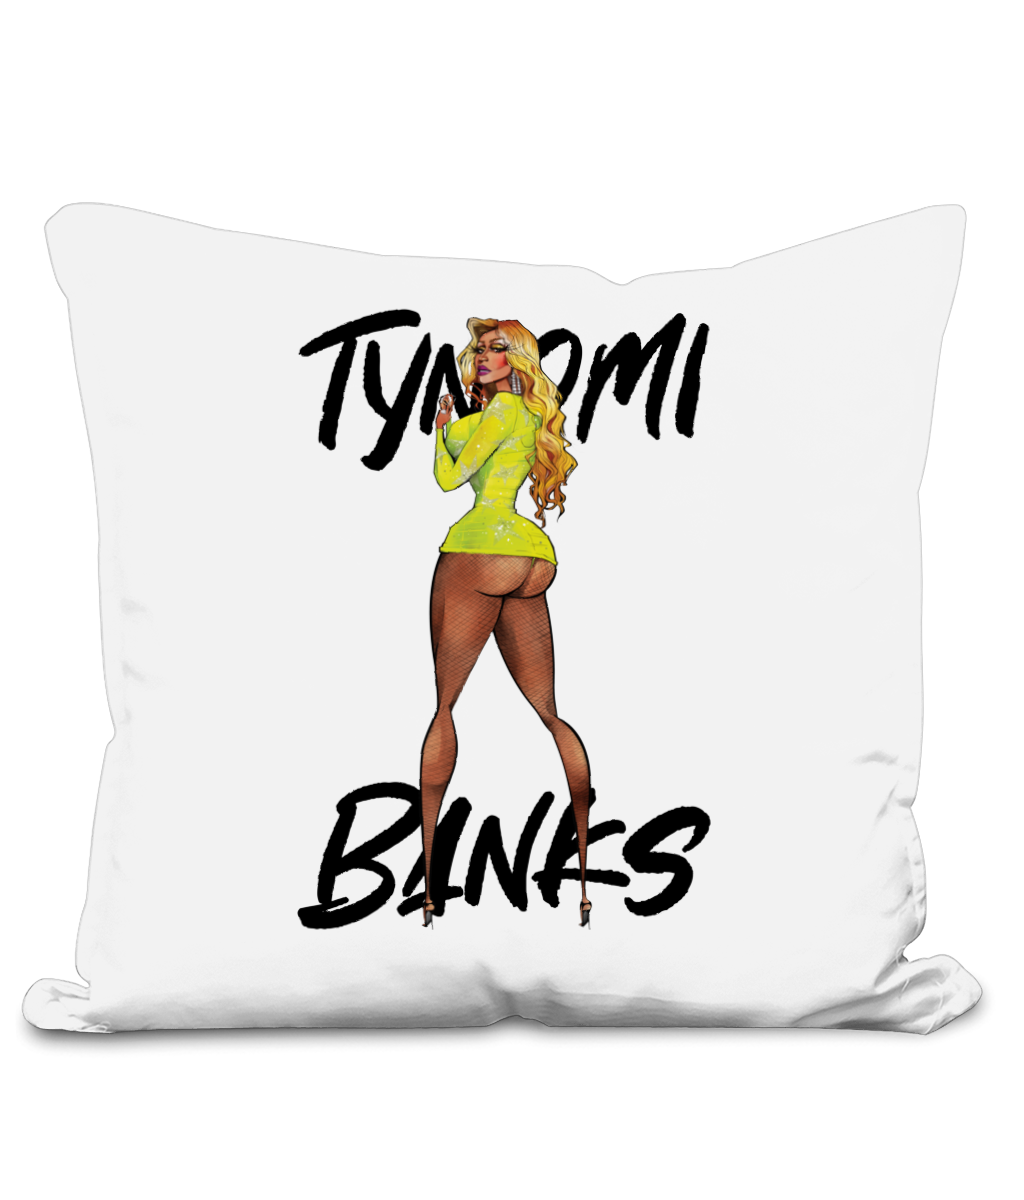 Tynomi Banks - Cushion Cover - SNATCHED MERCH